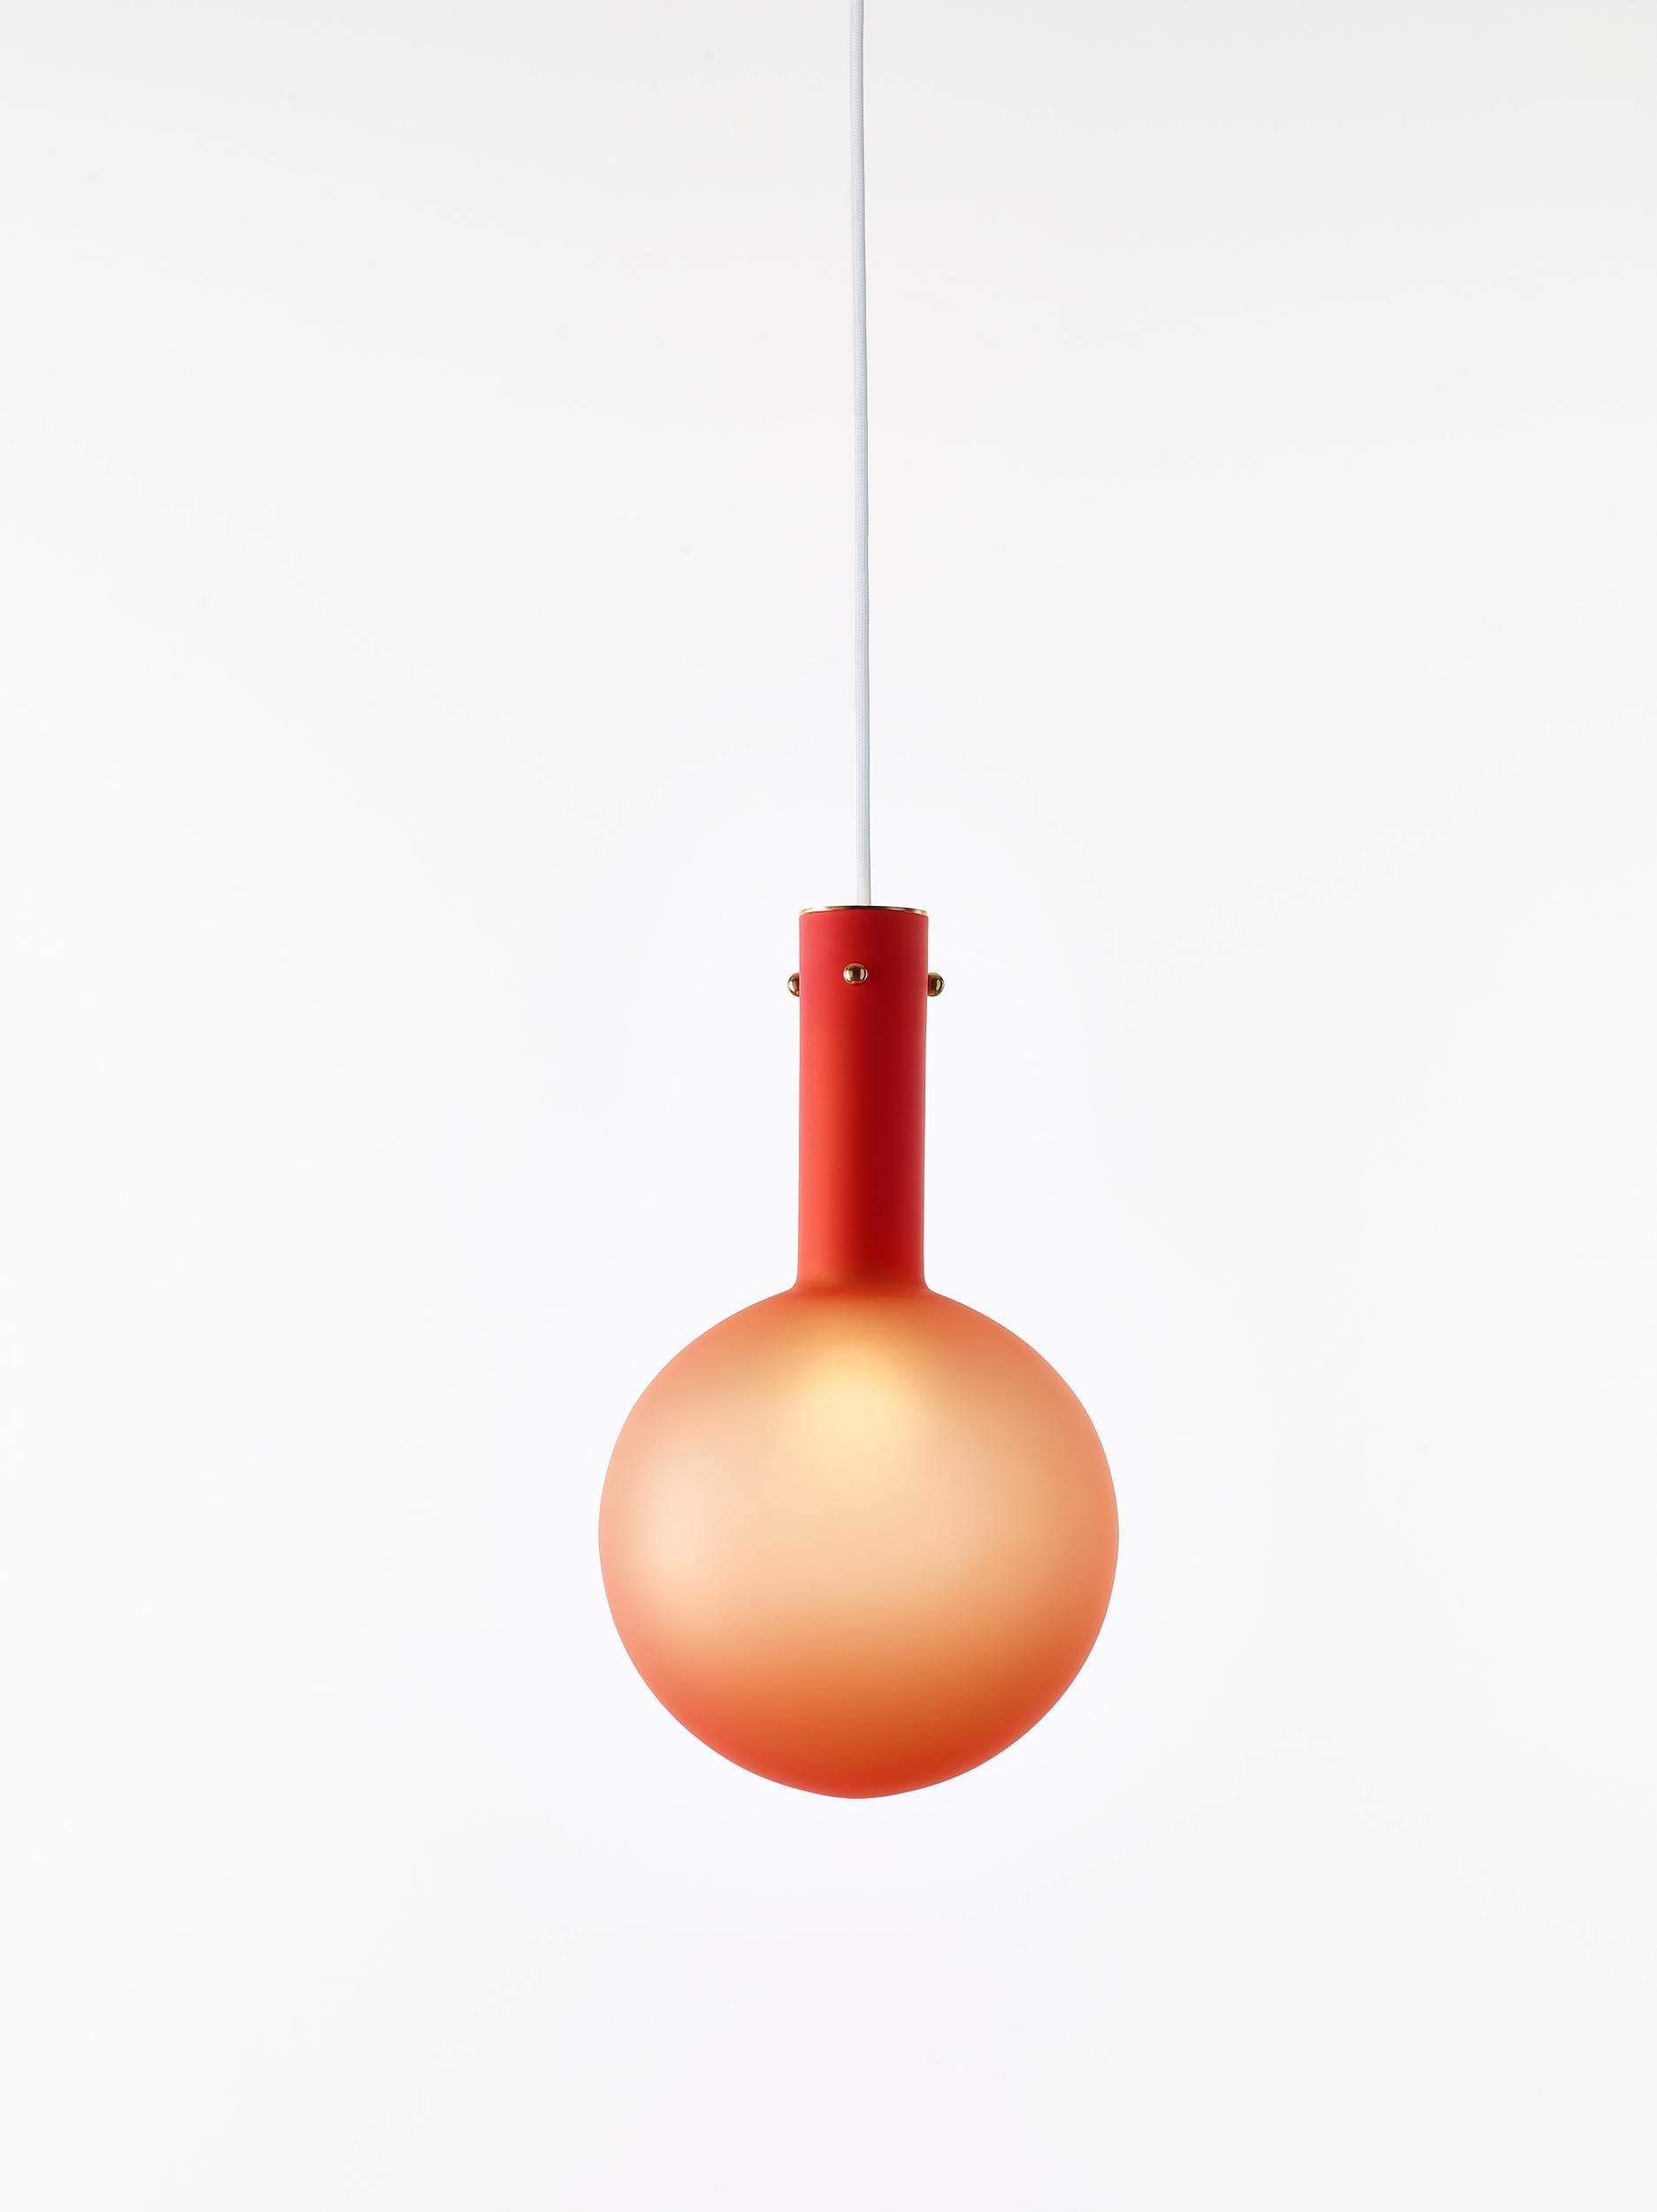 Matte red sphaerae pendant light by Dechem Studio
Dimensions: D 20 x H 180 cm
Materials: brass, metal, glass.
Also available: Different finishes and colours available

Only one homogenous piece of hand-blown glass creates the main body of